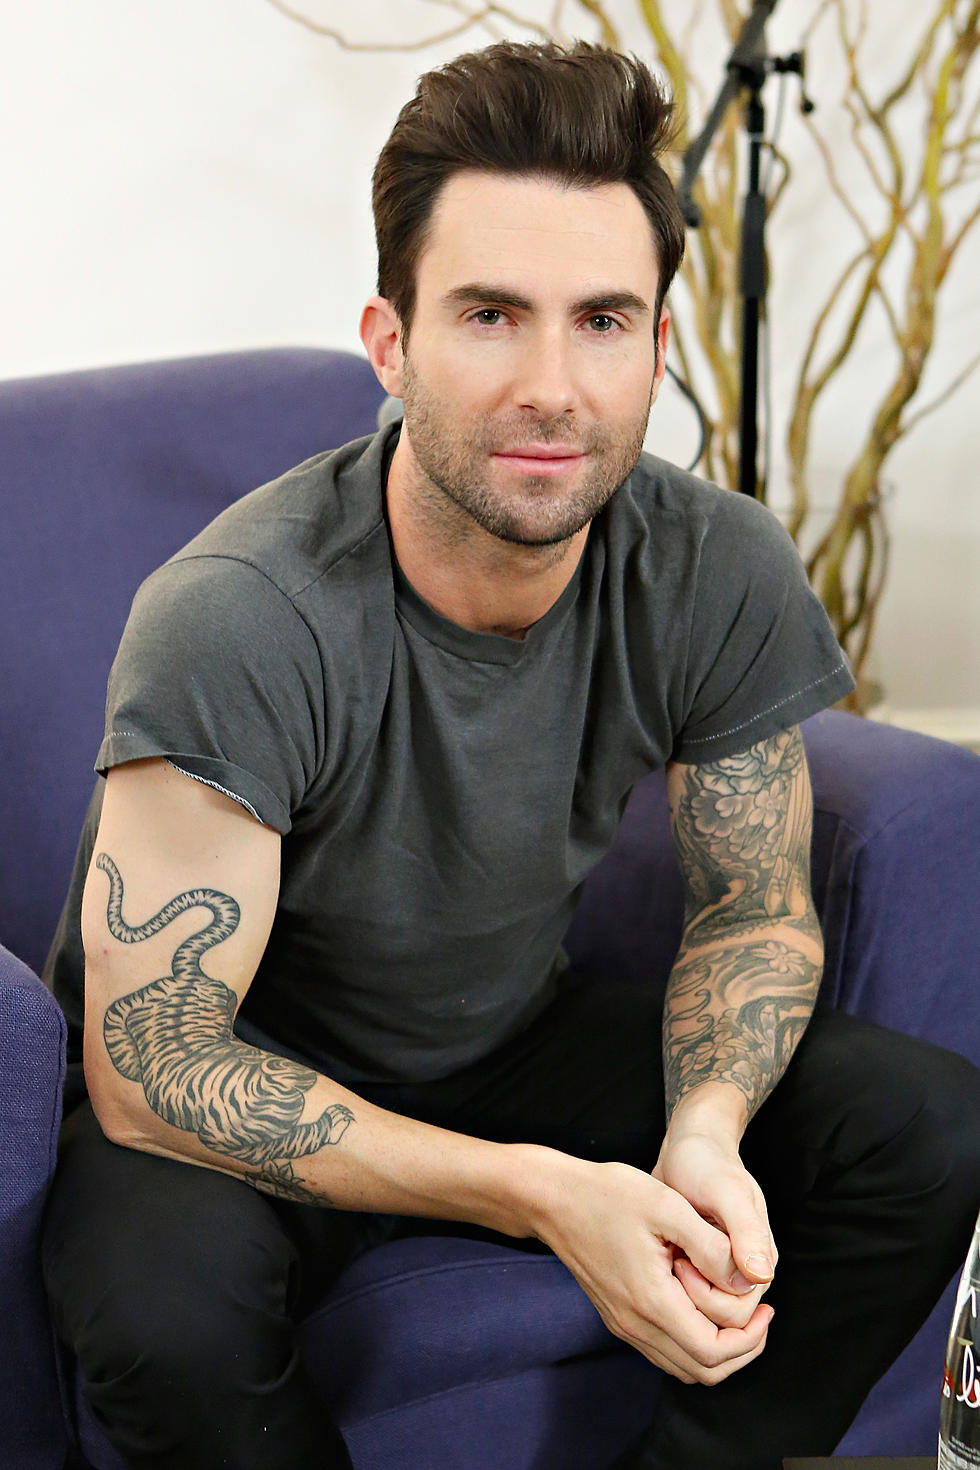 Adam Levine Is People Magazine’s “Sexiest Man Alive” For 2013